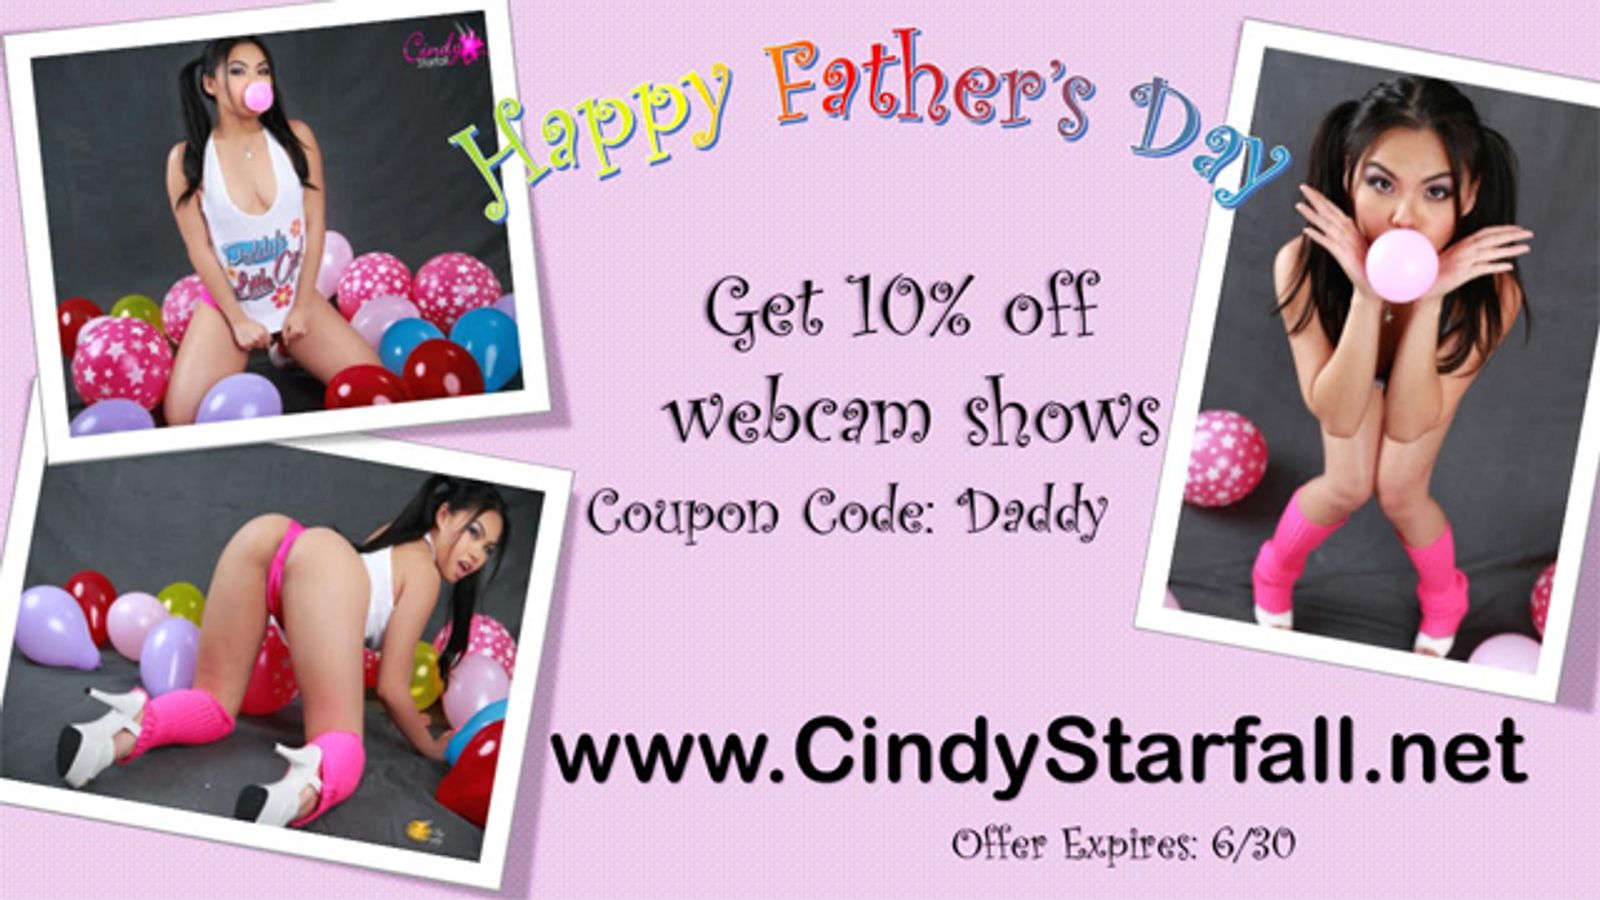 Cindy Starfall Loves Fathers with Extended Camshow Discount